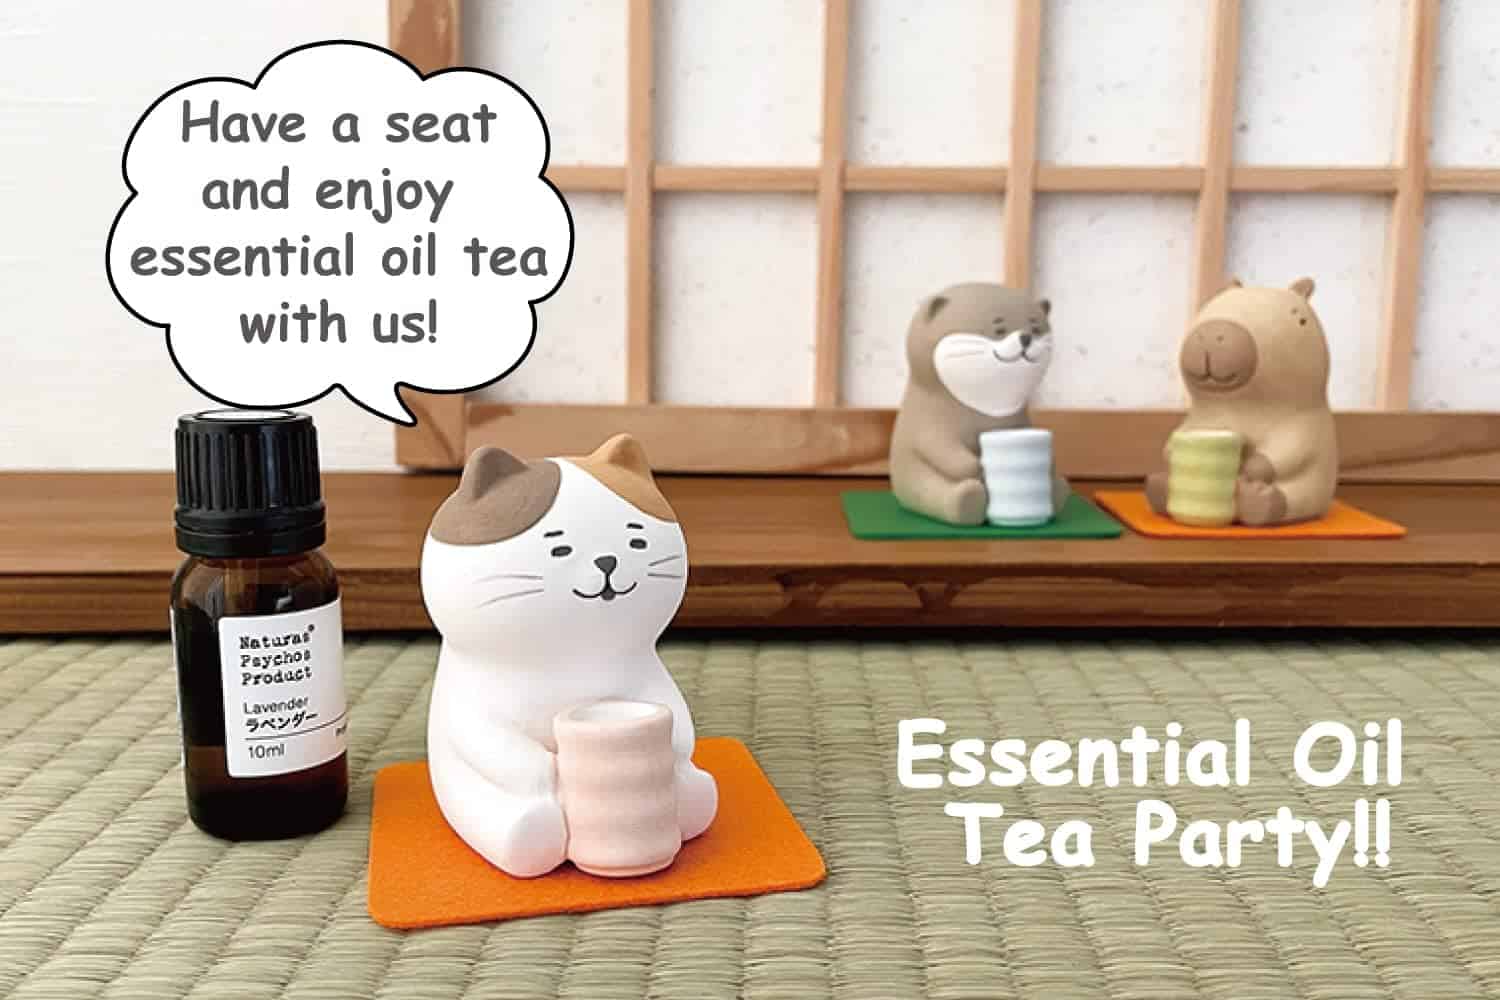 Stone Diffuser Tea-Drinking Animals Review